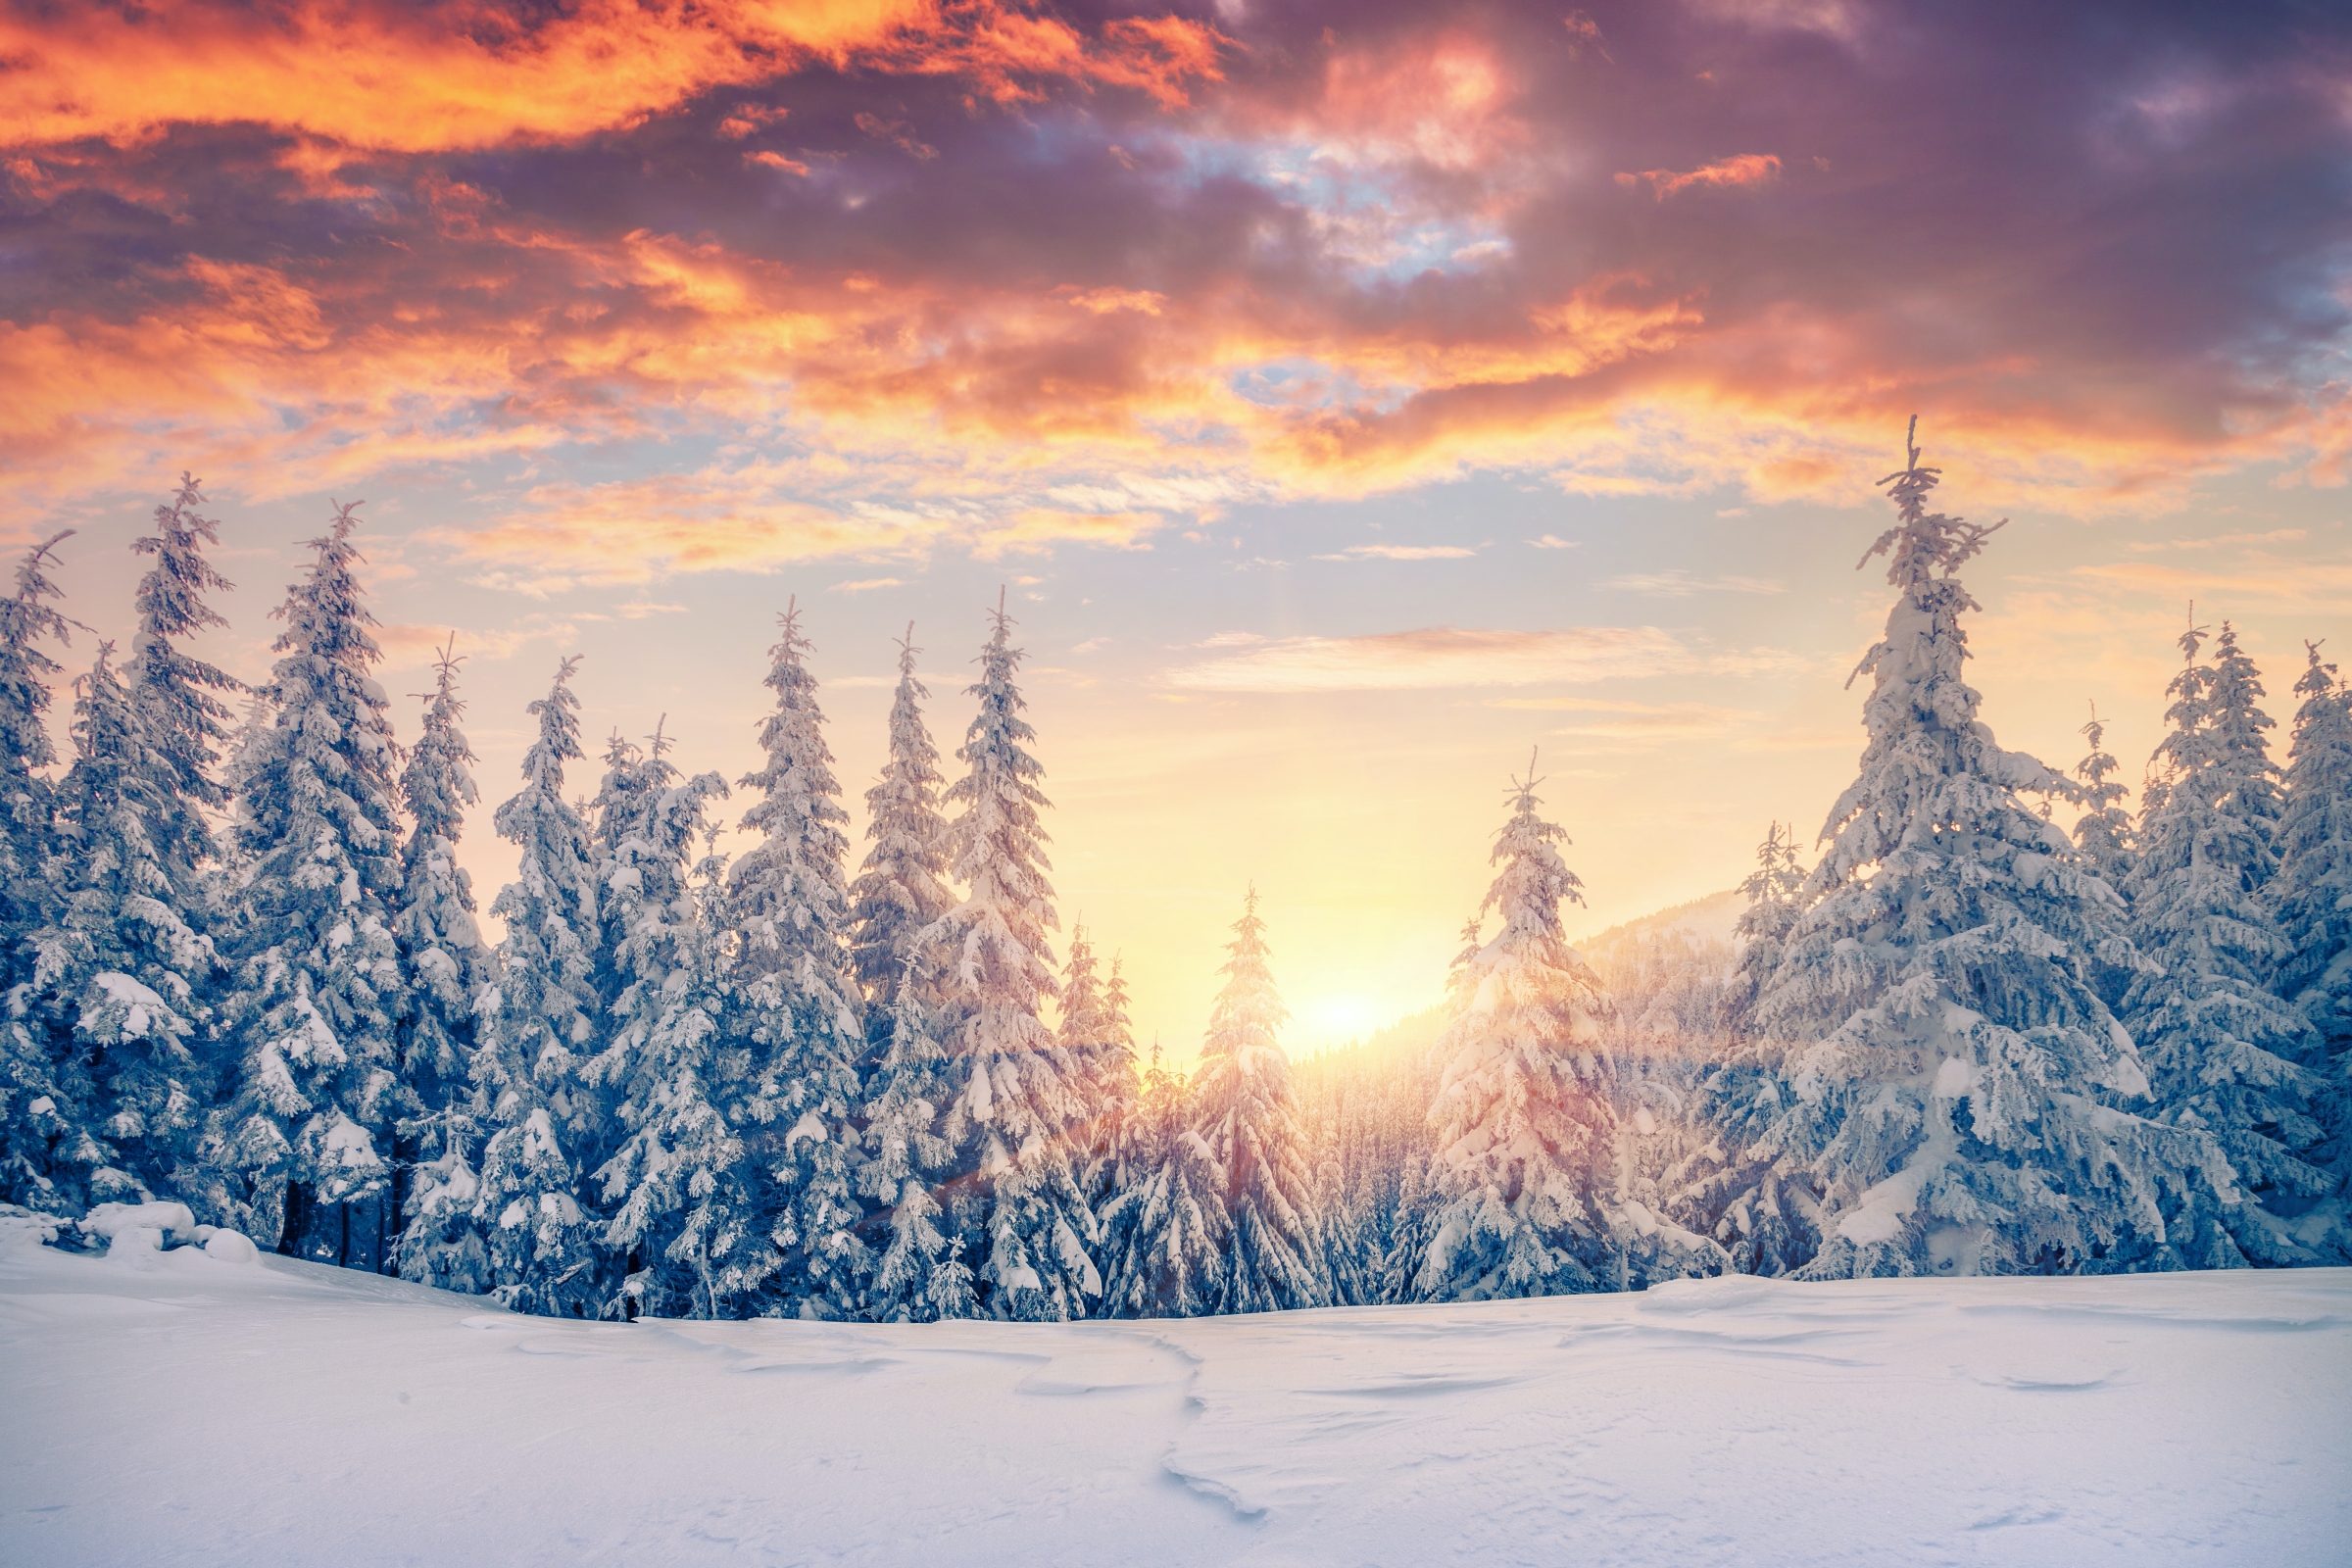 2020 Winter Solstice : What is Solstice? Know when is Winter Solstice and Why does it happen